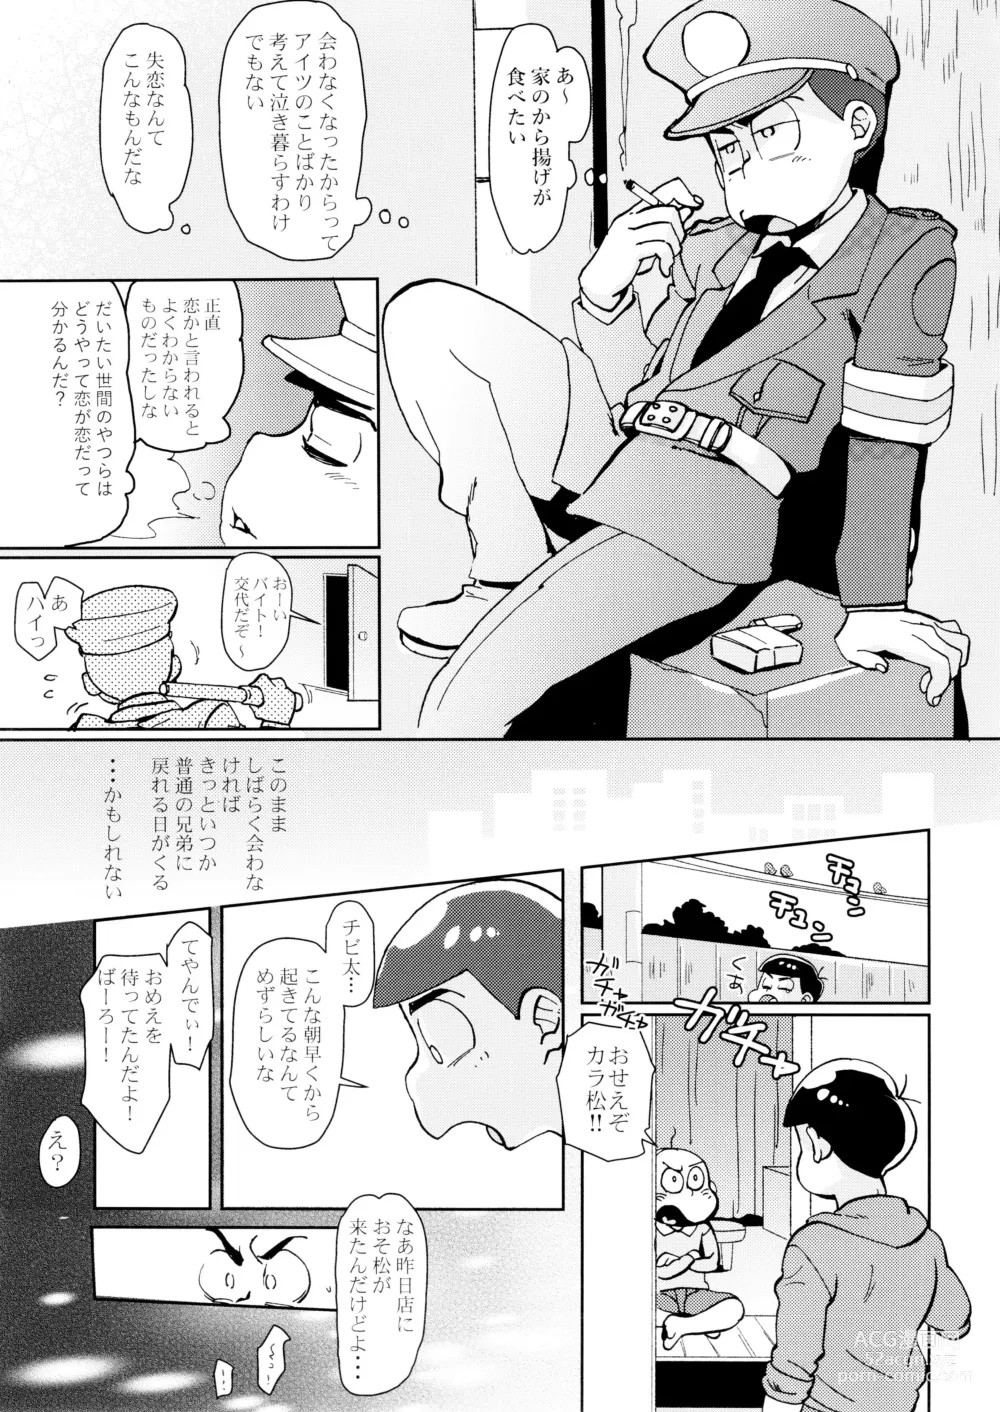 Page 17 of doujinshi Easy and Blue